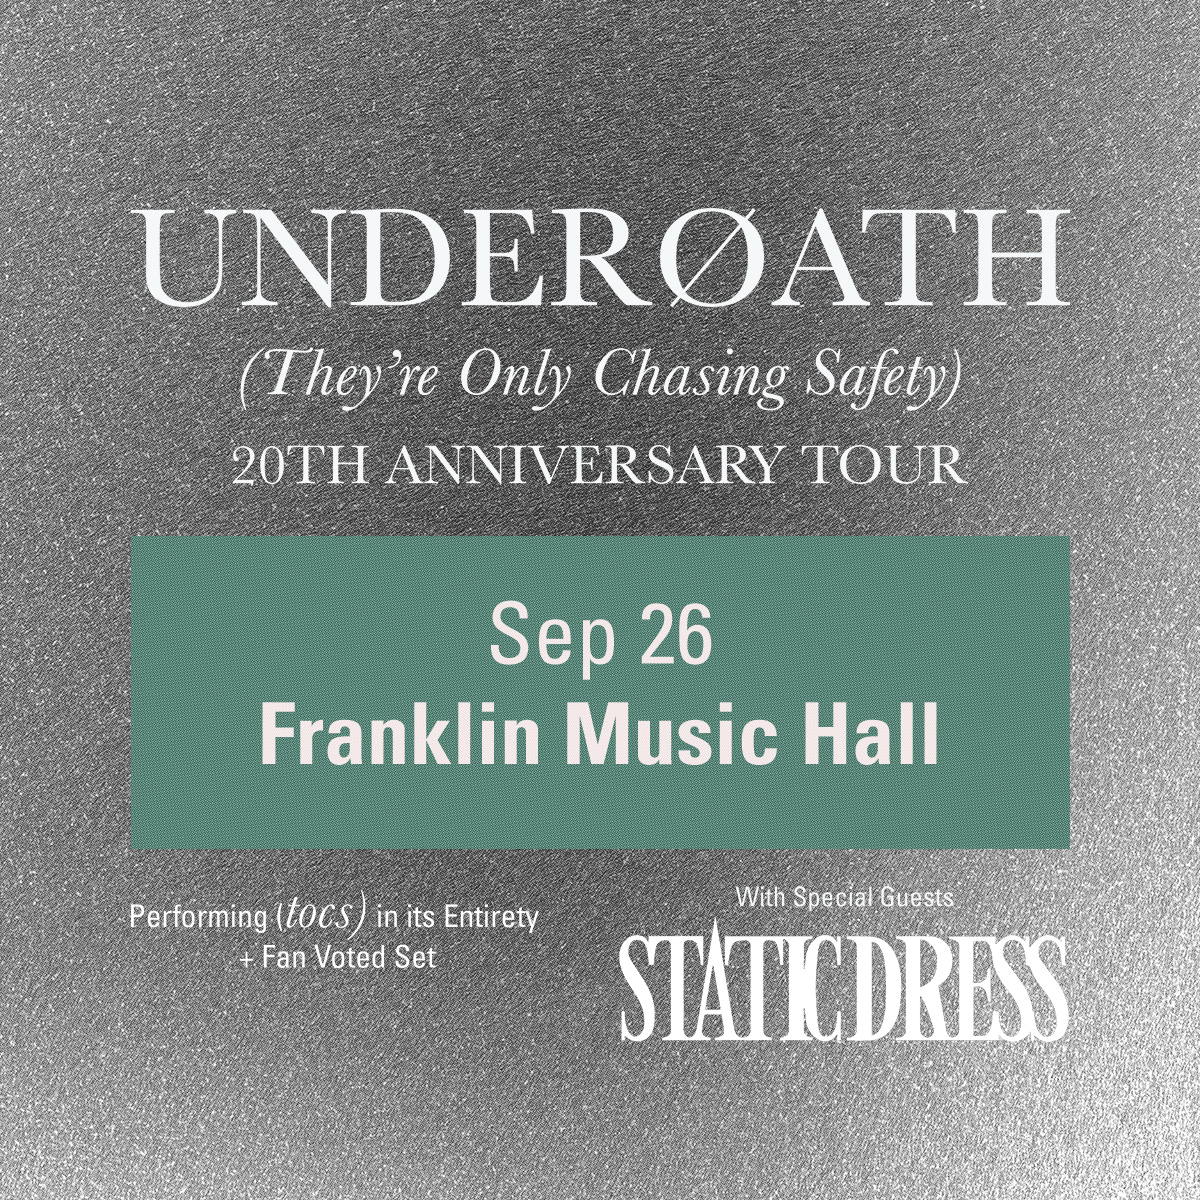 HUGE! We are THRILLED to announce @UnderoathBand will celebrate 20 years of 'They’re Only Chasing Safety' on Sep 26th, performing the album in full & another set of songs voted on by each city! This one will sell quick. Venue presale Thursday at 10a, public on sale Friday at 10a!